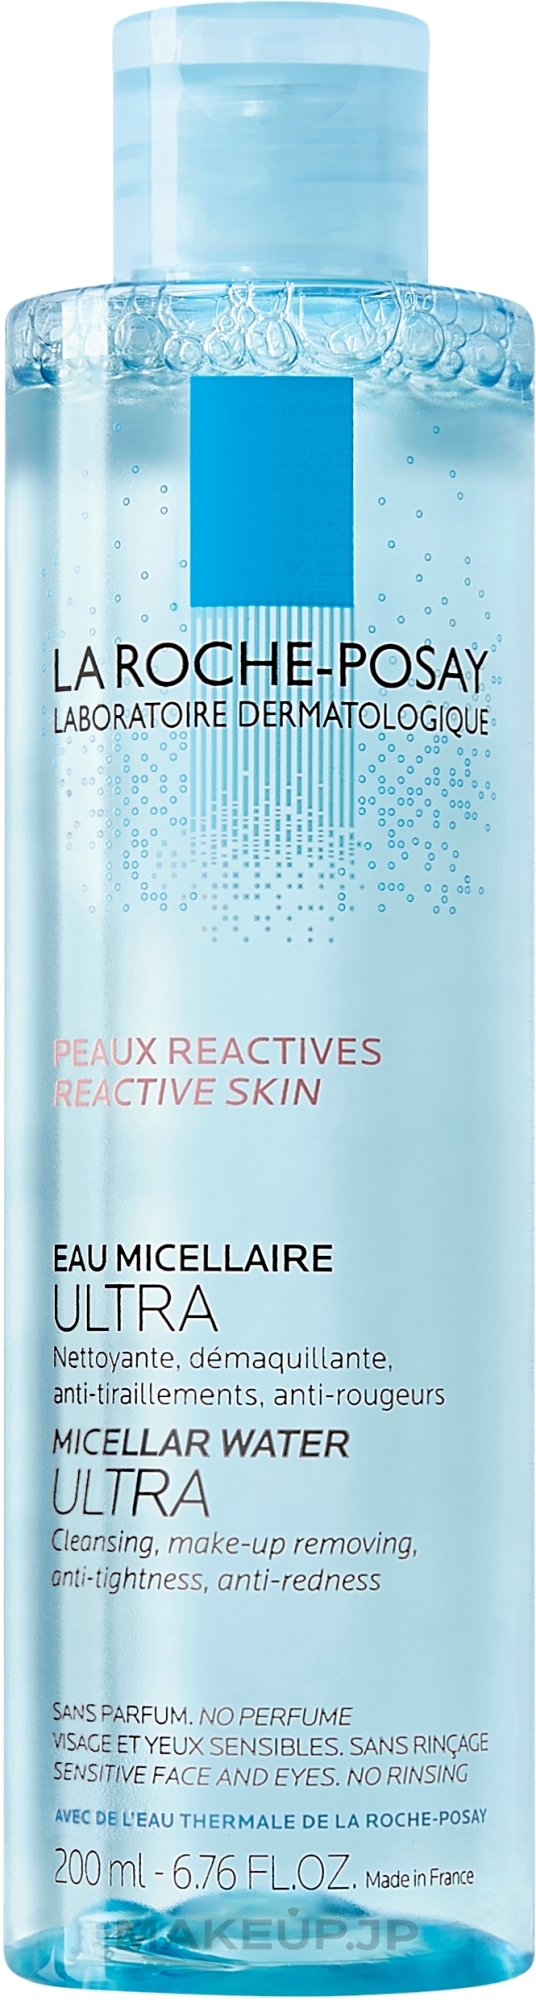 Micellar Water for Hypersensitive Skin, Prone to Irritation - La Roche-Posay Micellar Water Ultra for Reactive Skin — photo 200 ml